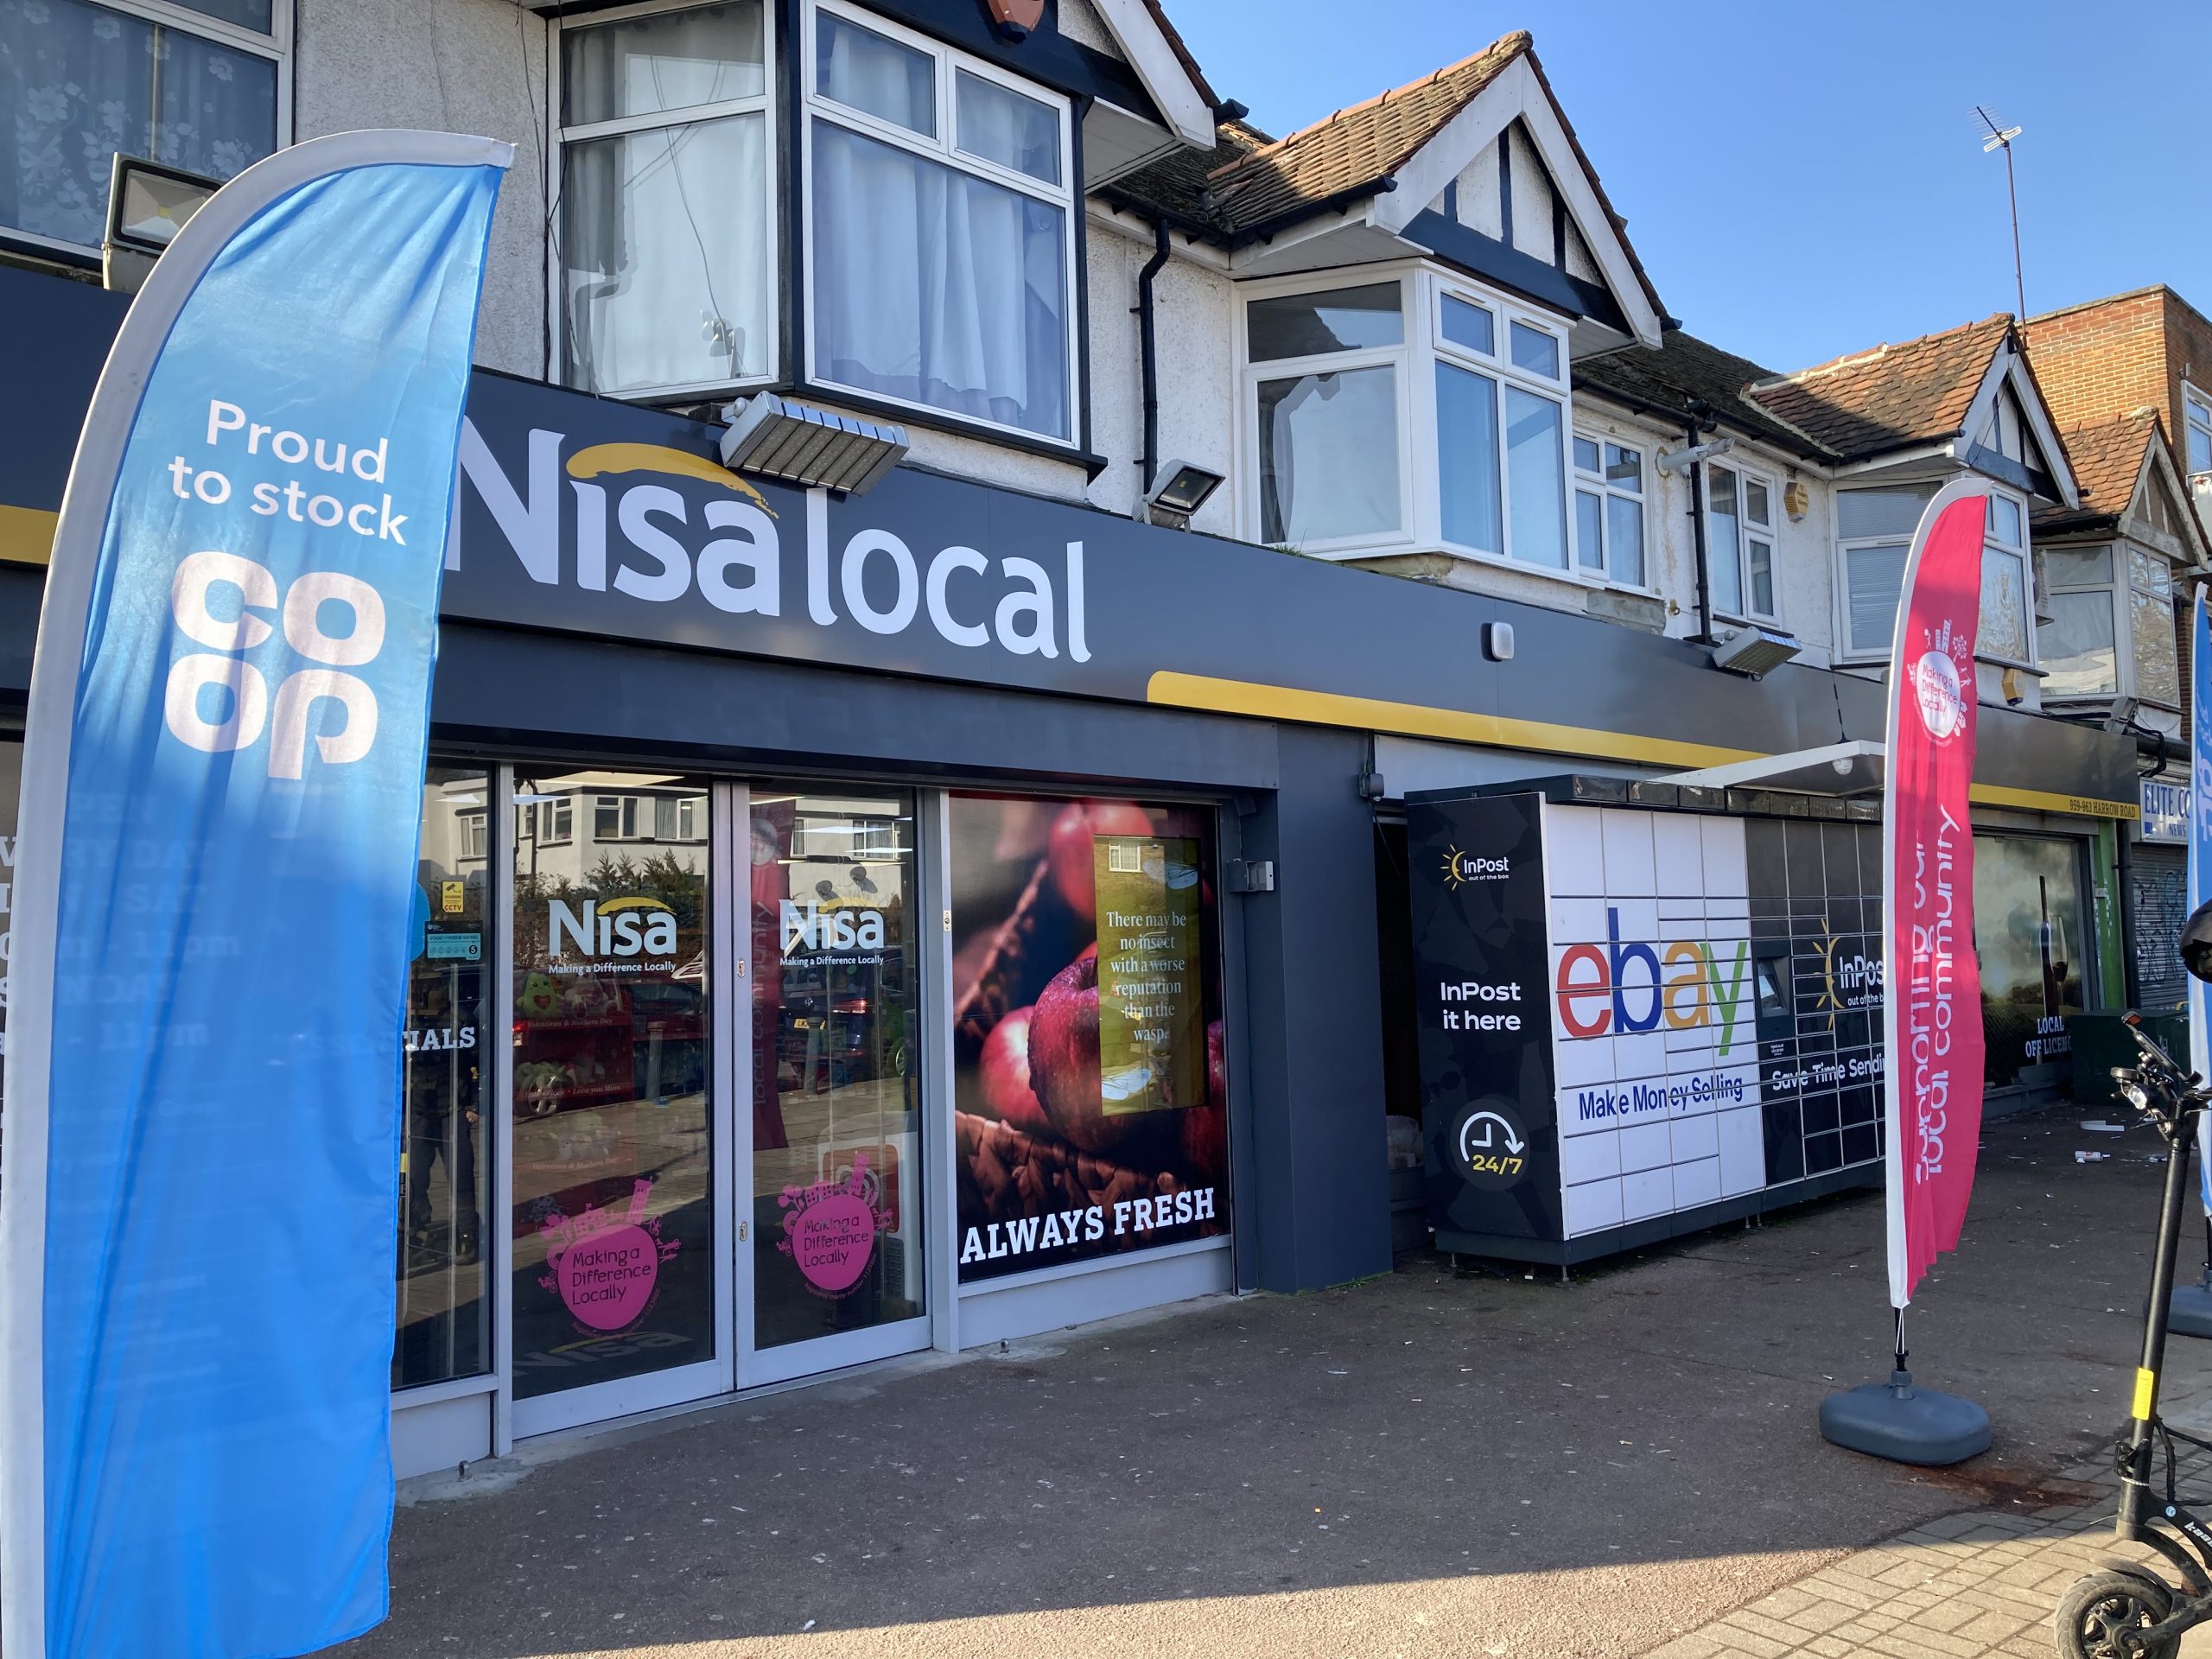 Nisa retailers investing in better value product ranges following London openings